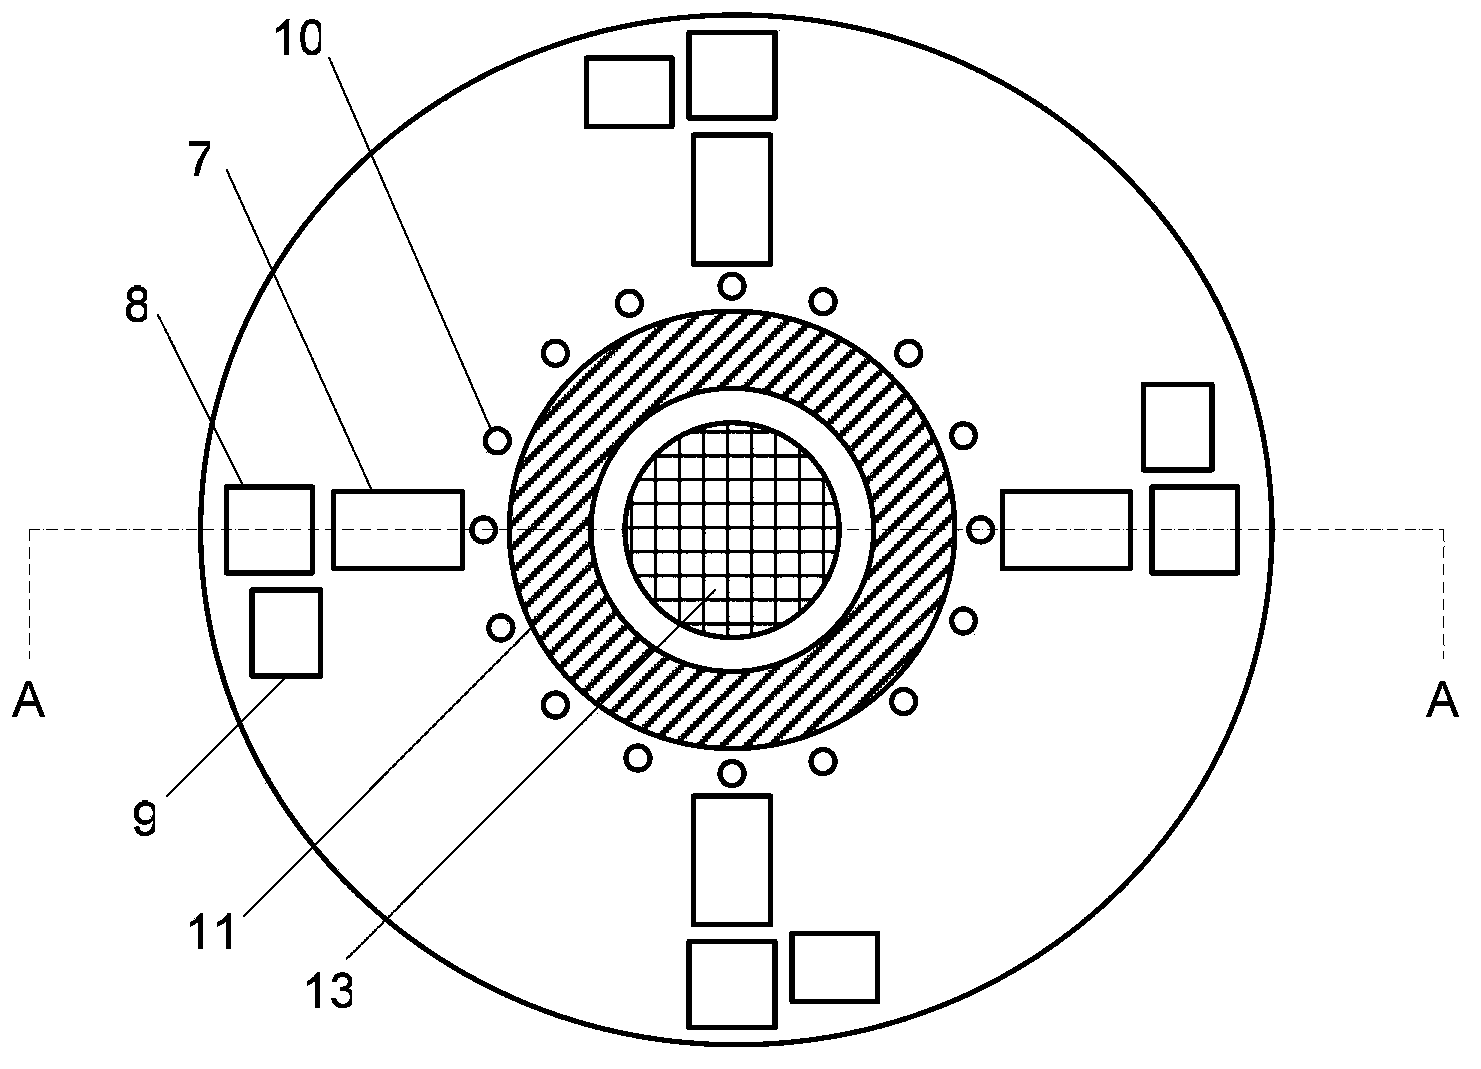 Semiconductor opening switch (SOS)-based ultra-wide spectrum pulse generator with 100 kHz pulse frequency